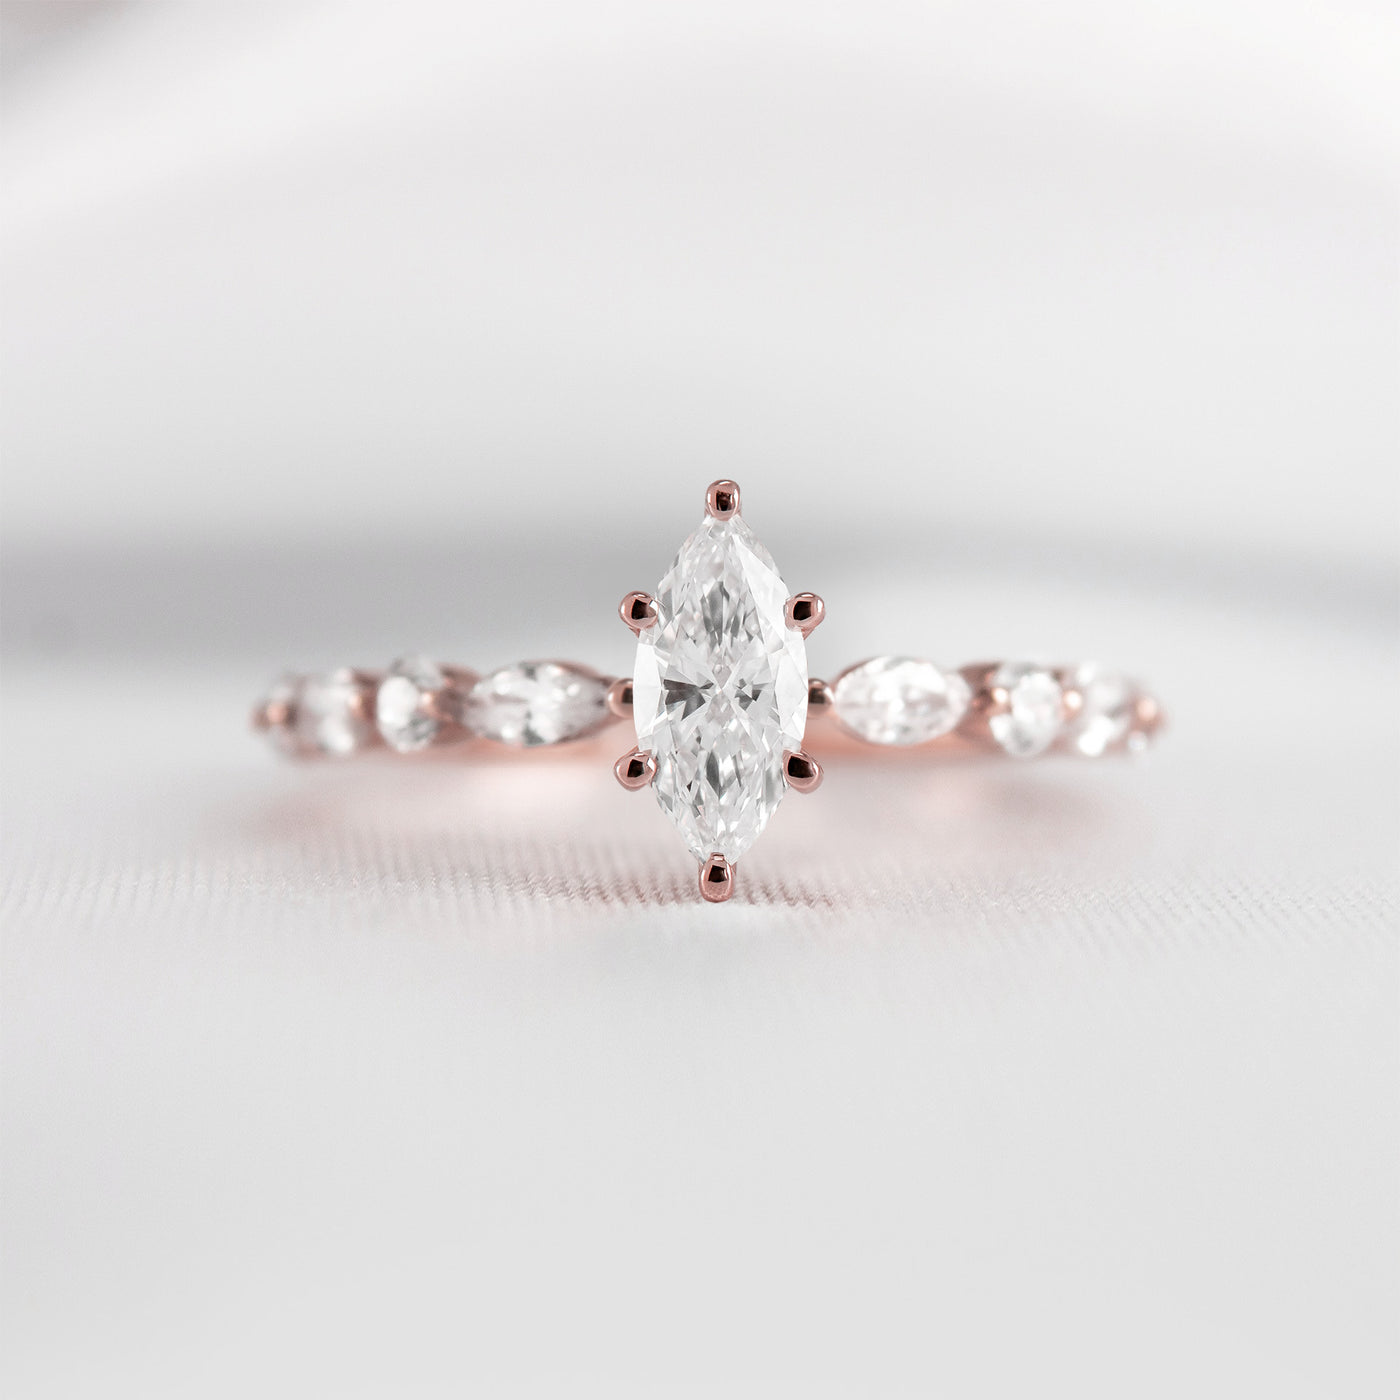 Shown in 1.0 Carat * The Marley Side Stone Diamond Engagement Ring | Lisa Robin#shape_pear